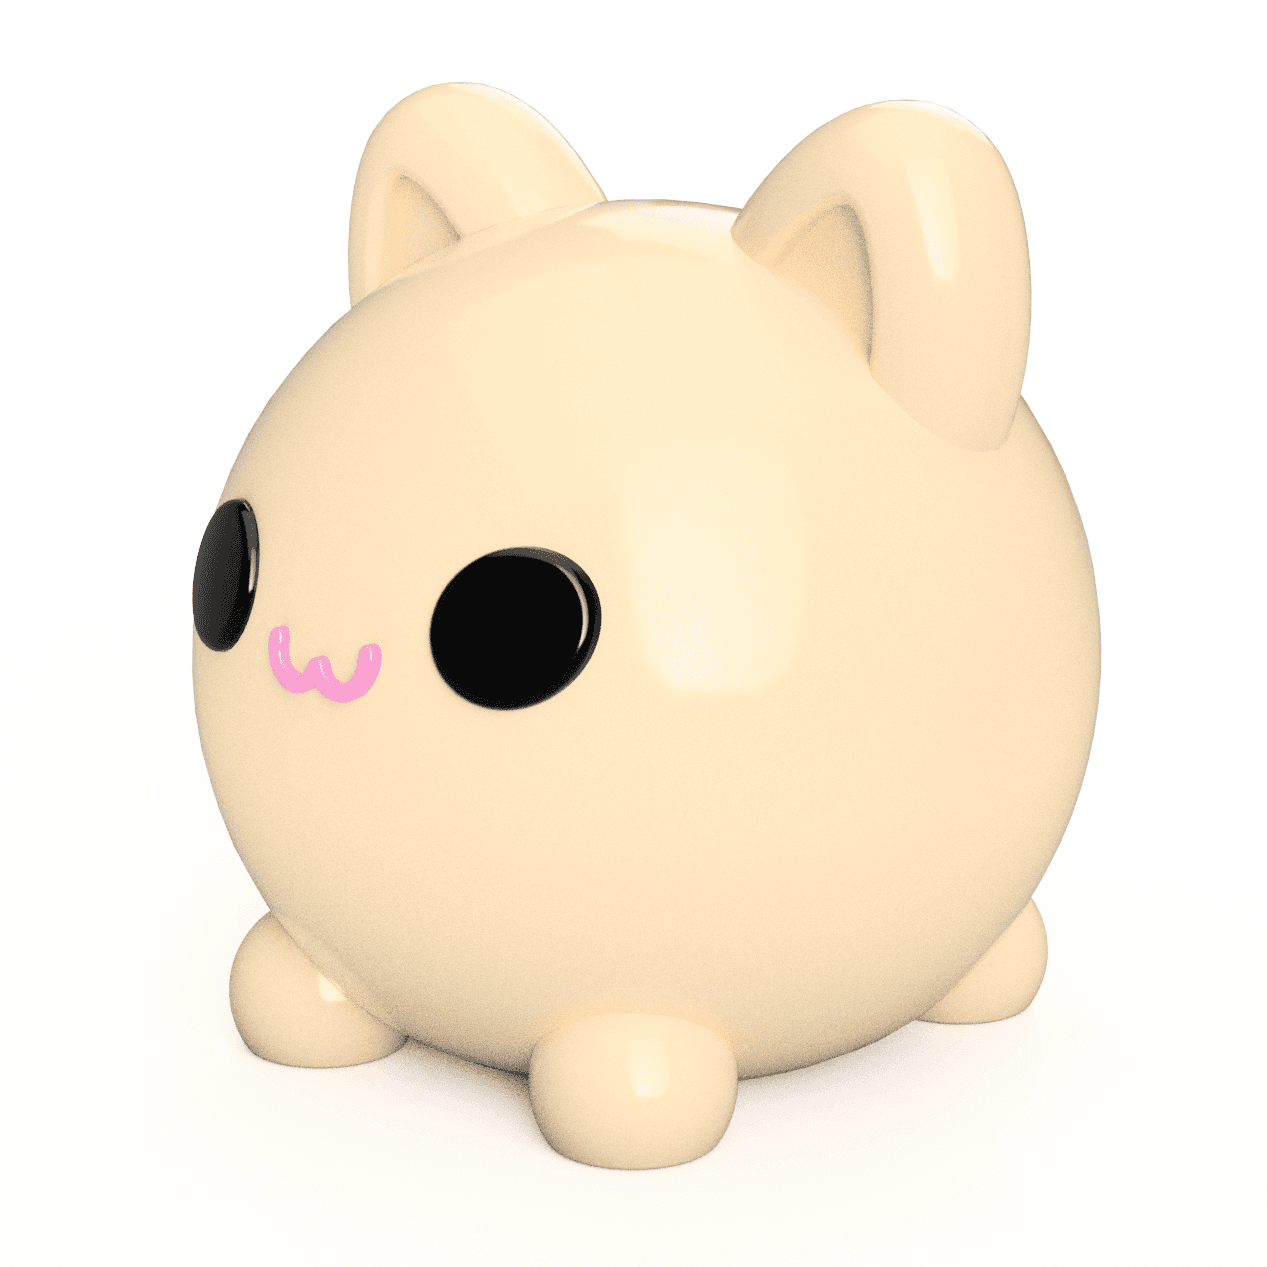 3D Printable Cute Kitty Nugget STL File - Perfect for Personal & Commercial Projects 3d model